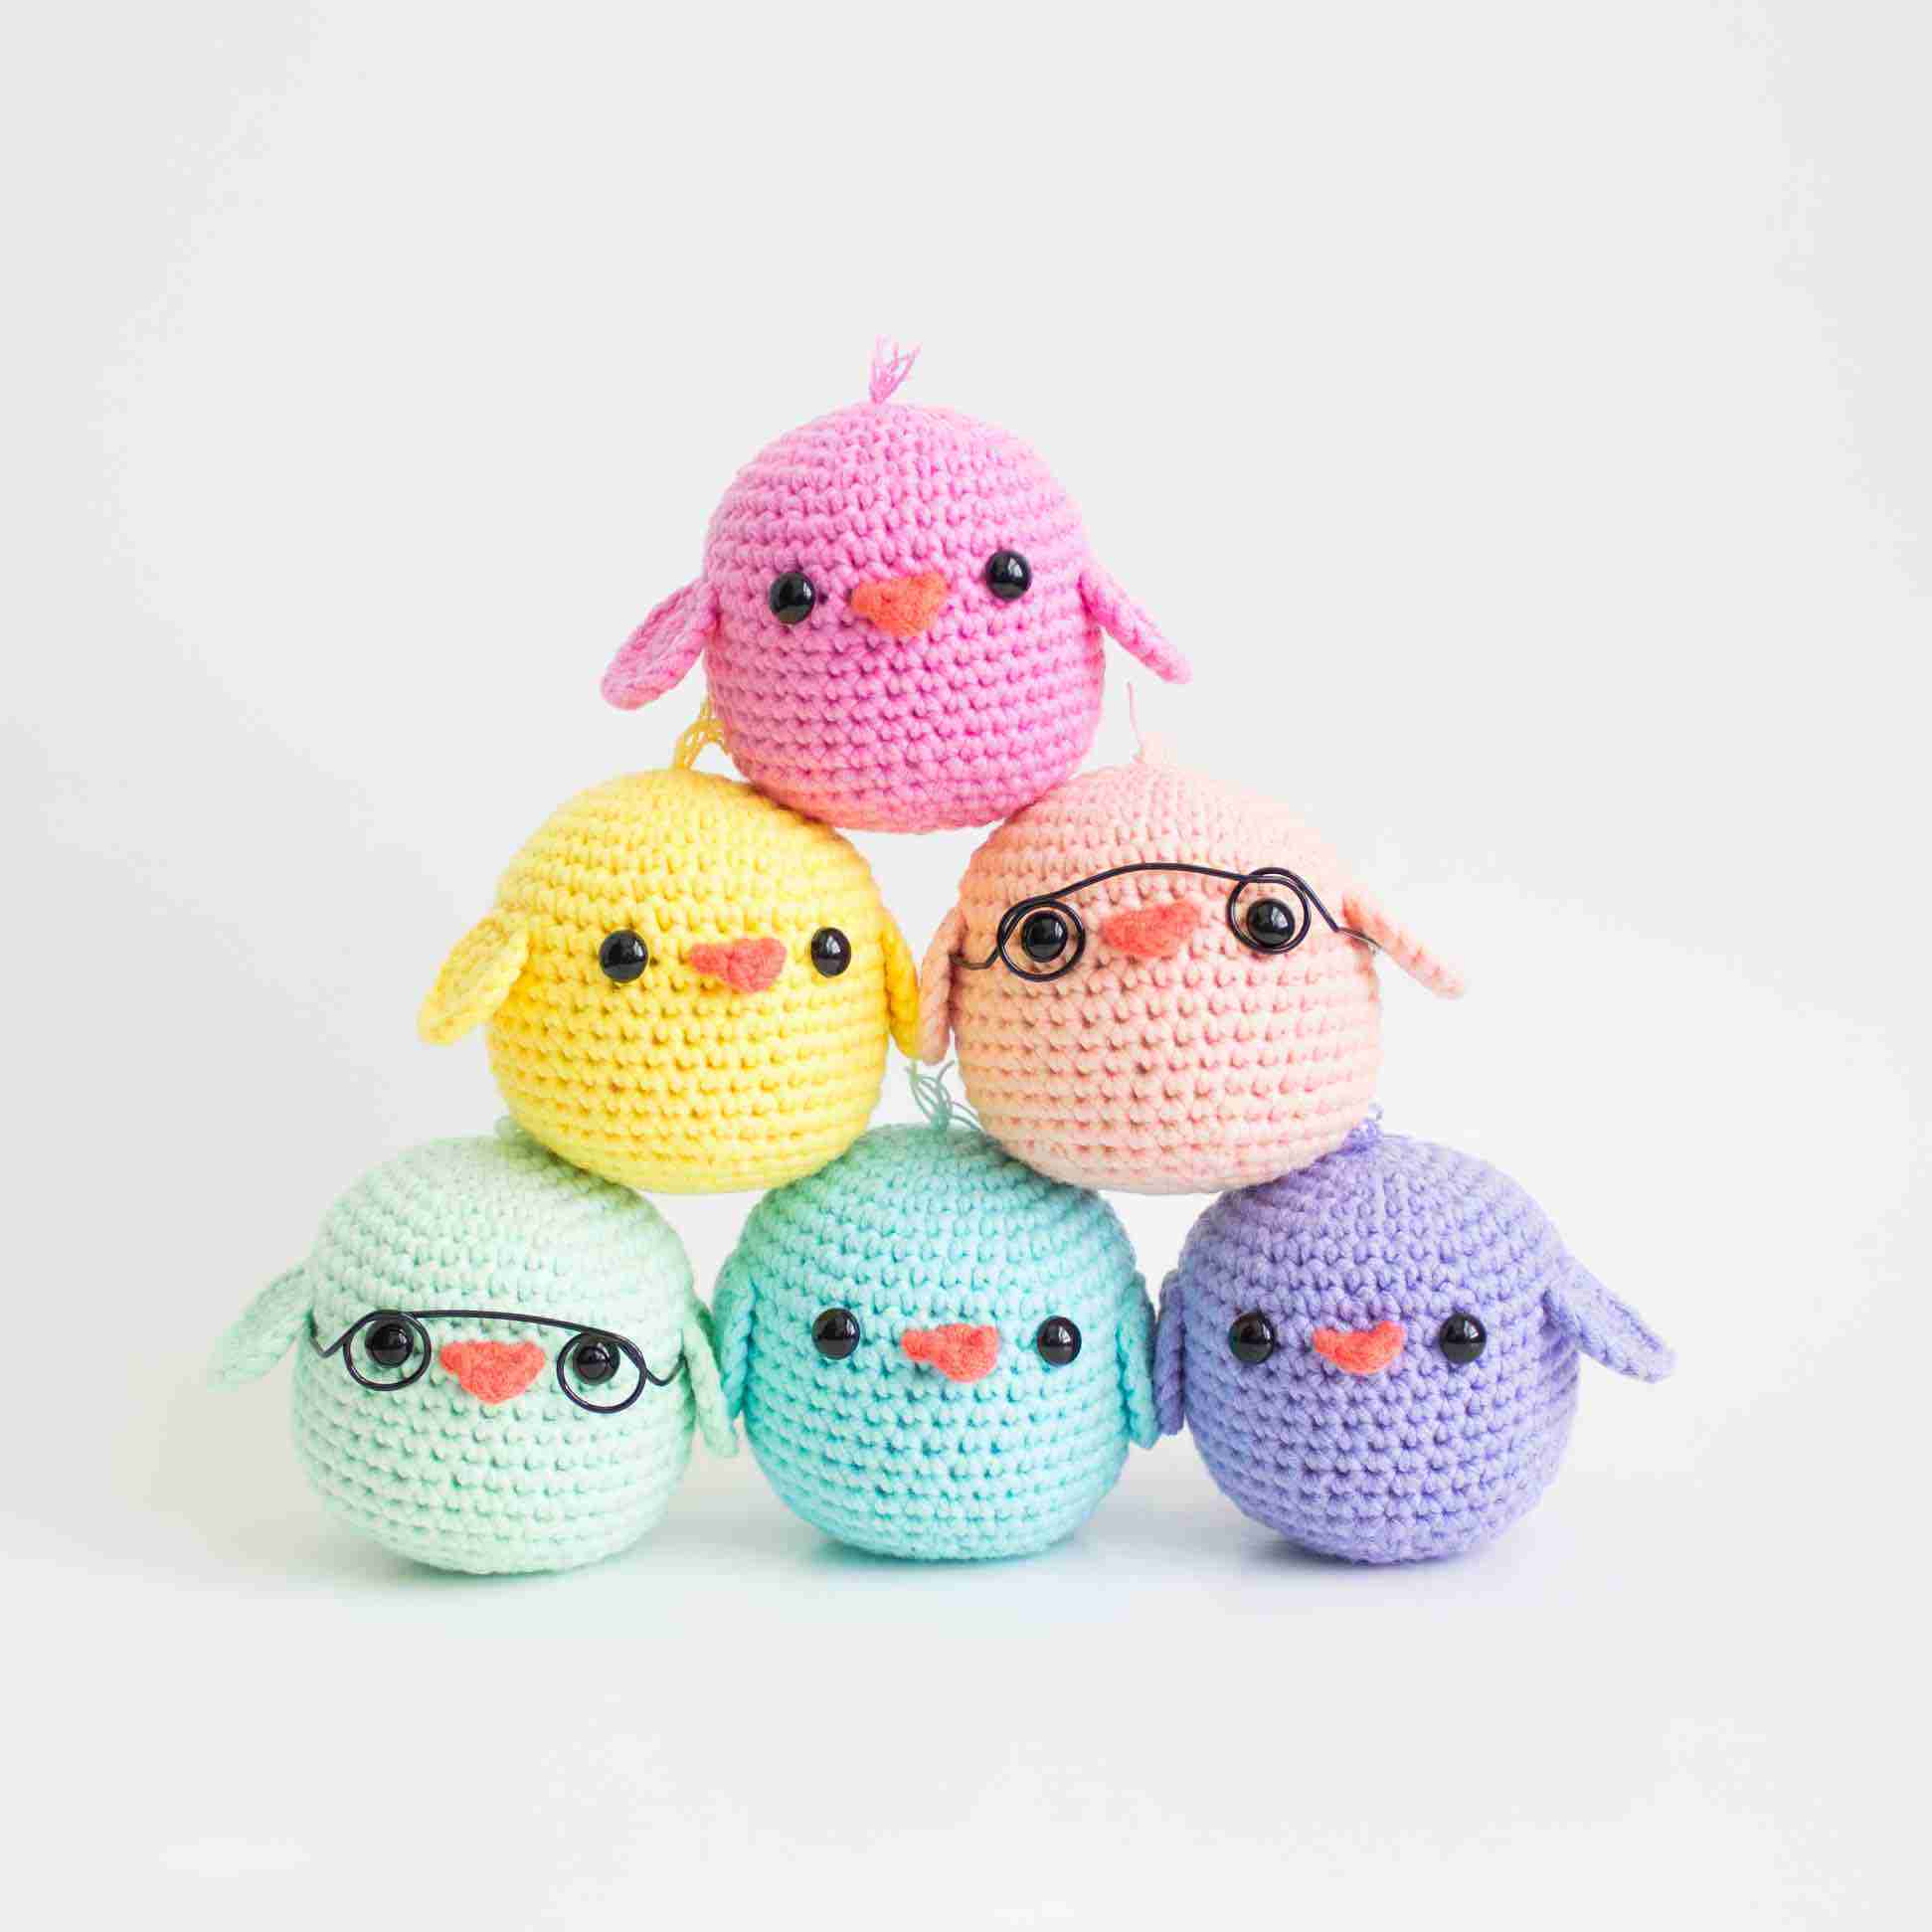 Easter crochet patterns Easter Chicks Amigurumi Free Pattern -A Menagerie of Stitches